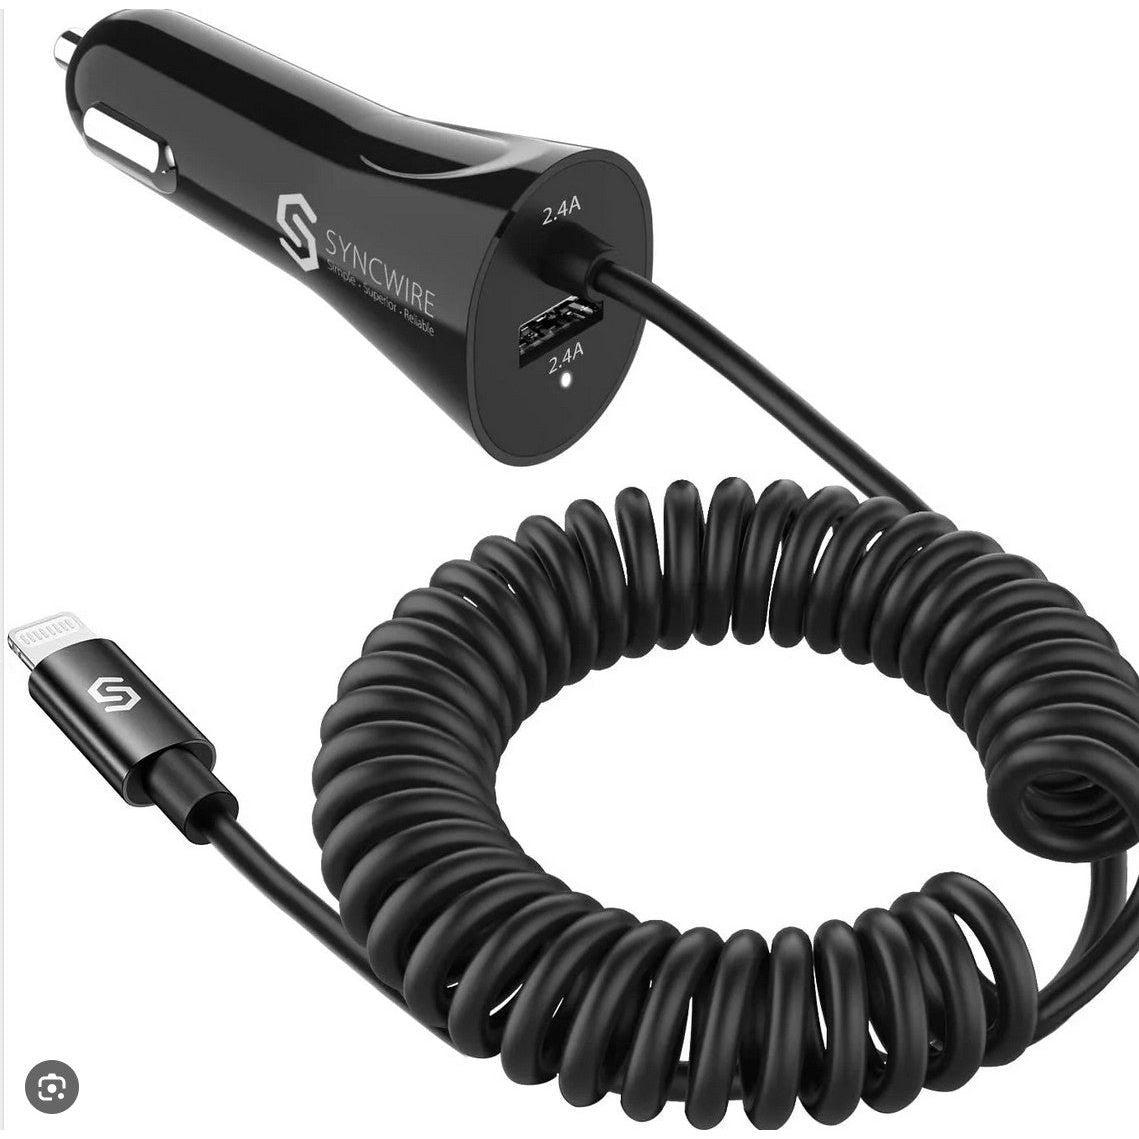 Optional Car Charger